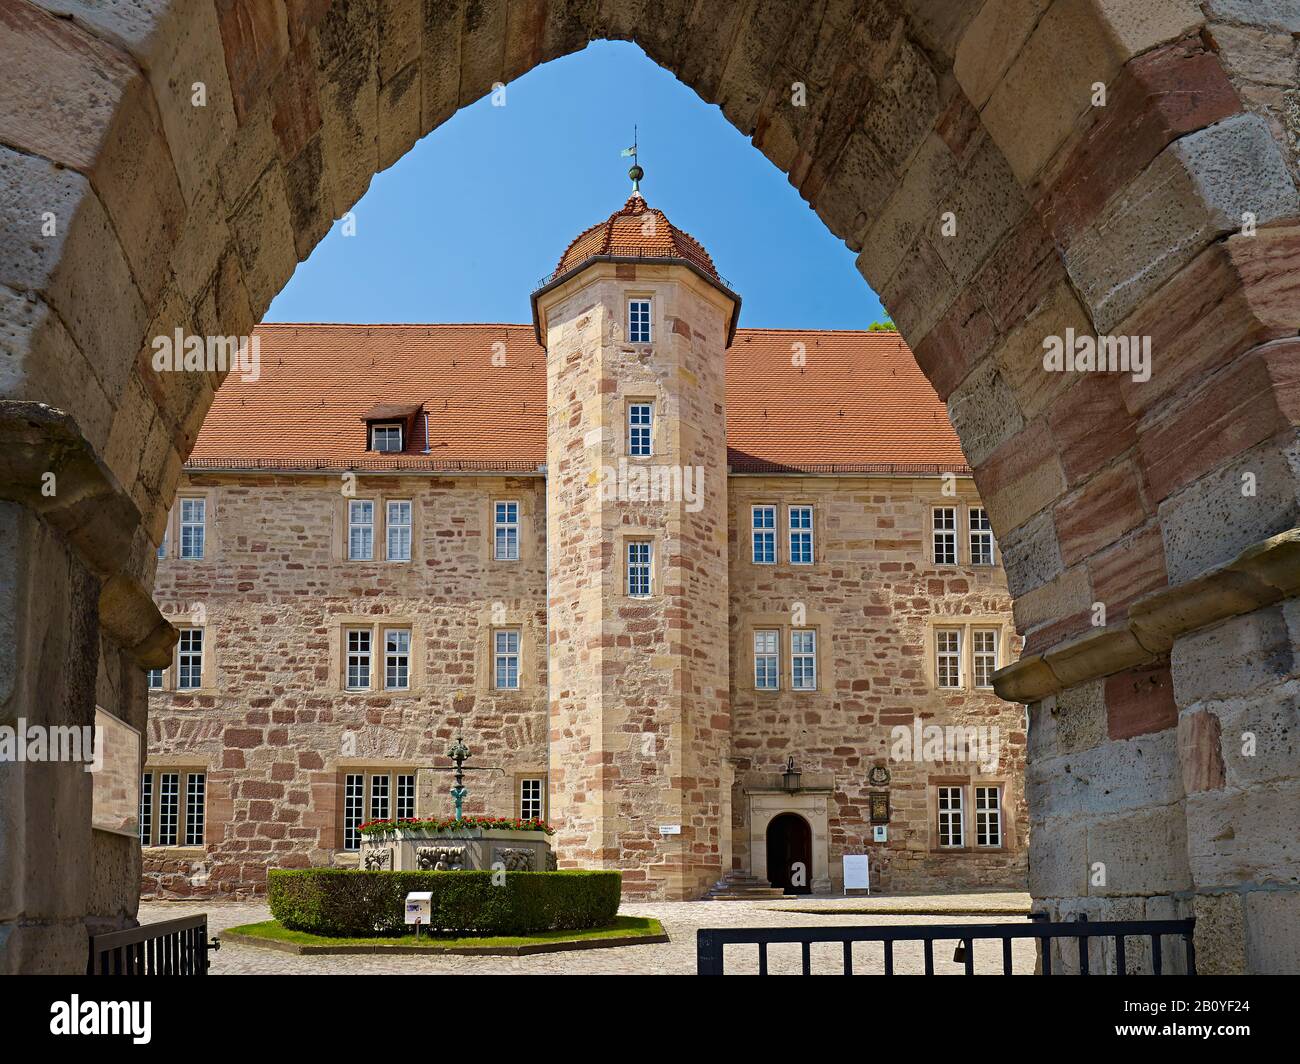 View into the courtyard of the Eschweger Landgrave's castle, Werra-Meissner district, Hesse, Germany, Stock Photo